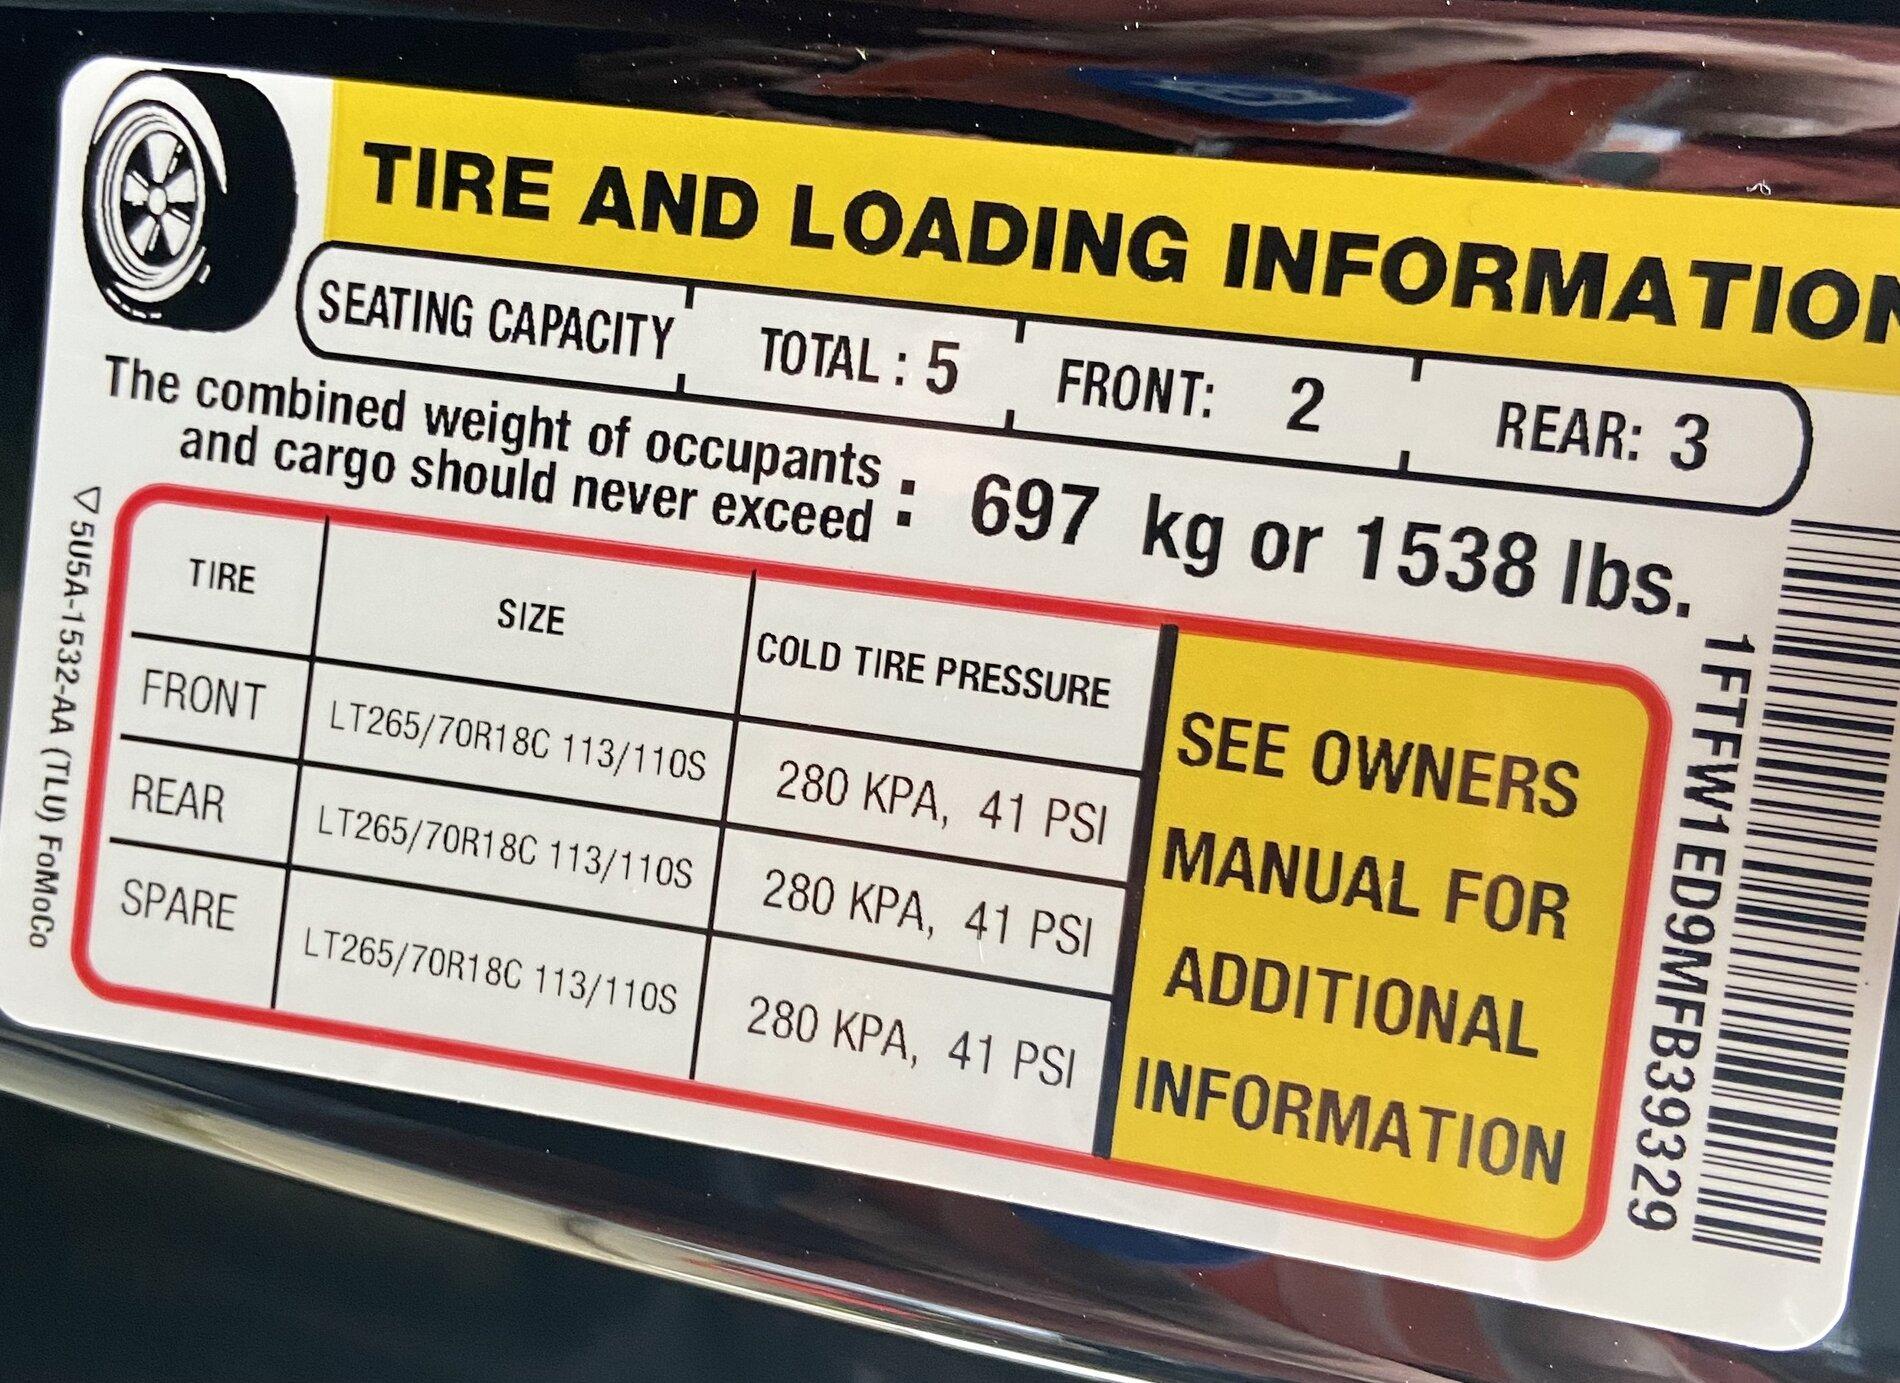 Ford F-150 Lightning Thoughts about towing with my truck - 2021 F150 Tire and loading F150 2020